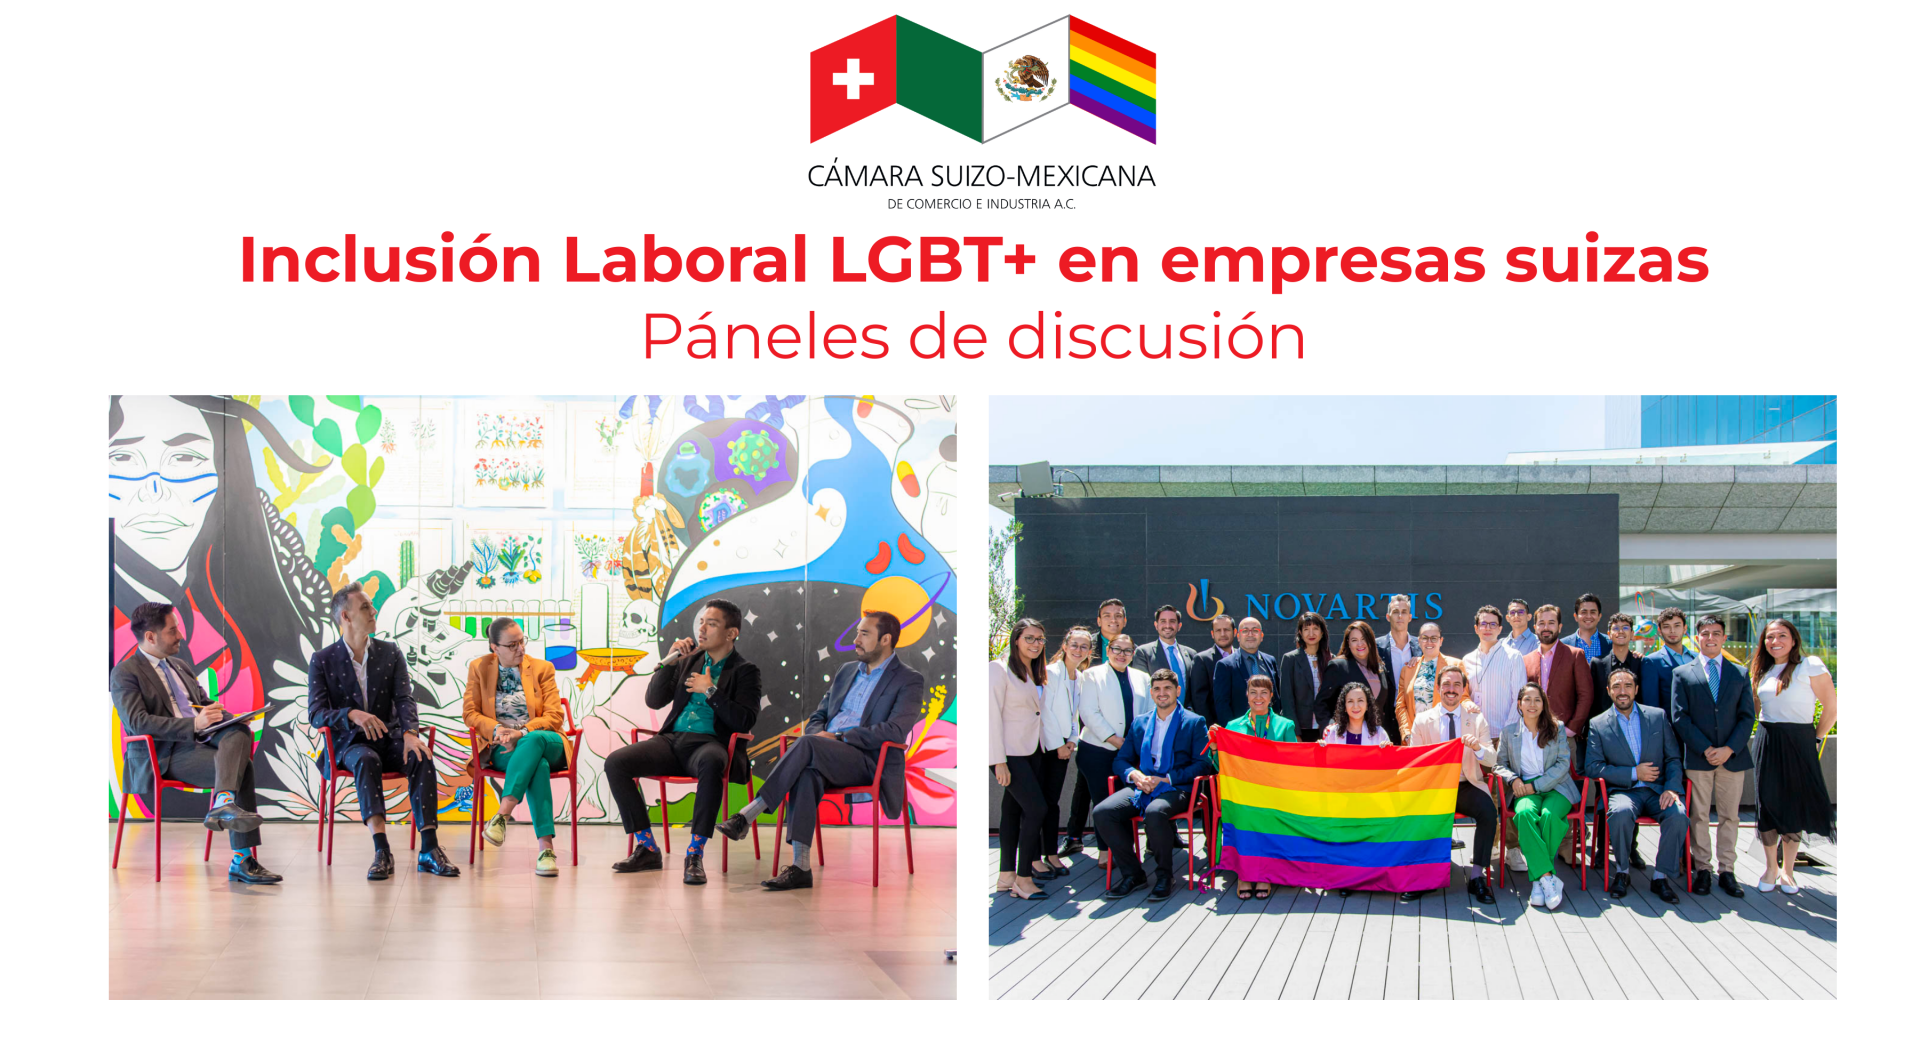 LGBT+ Inclusion in Swiss Companies